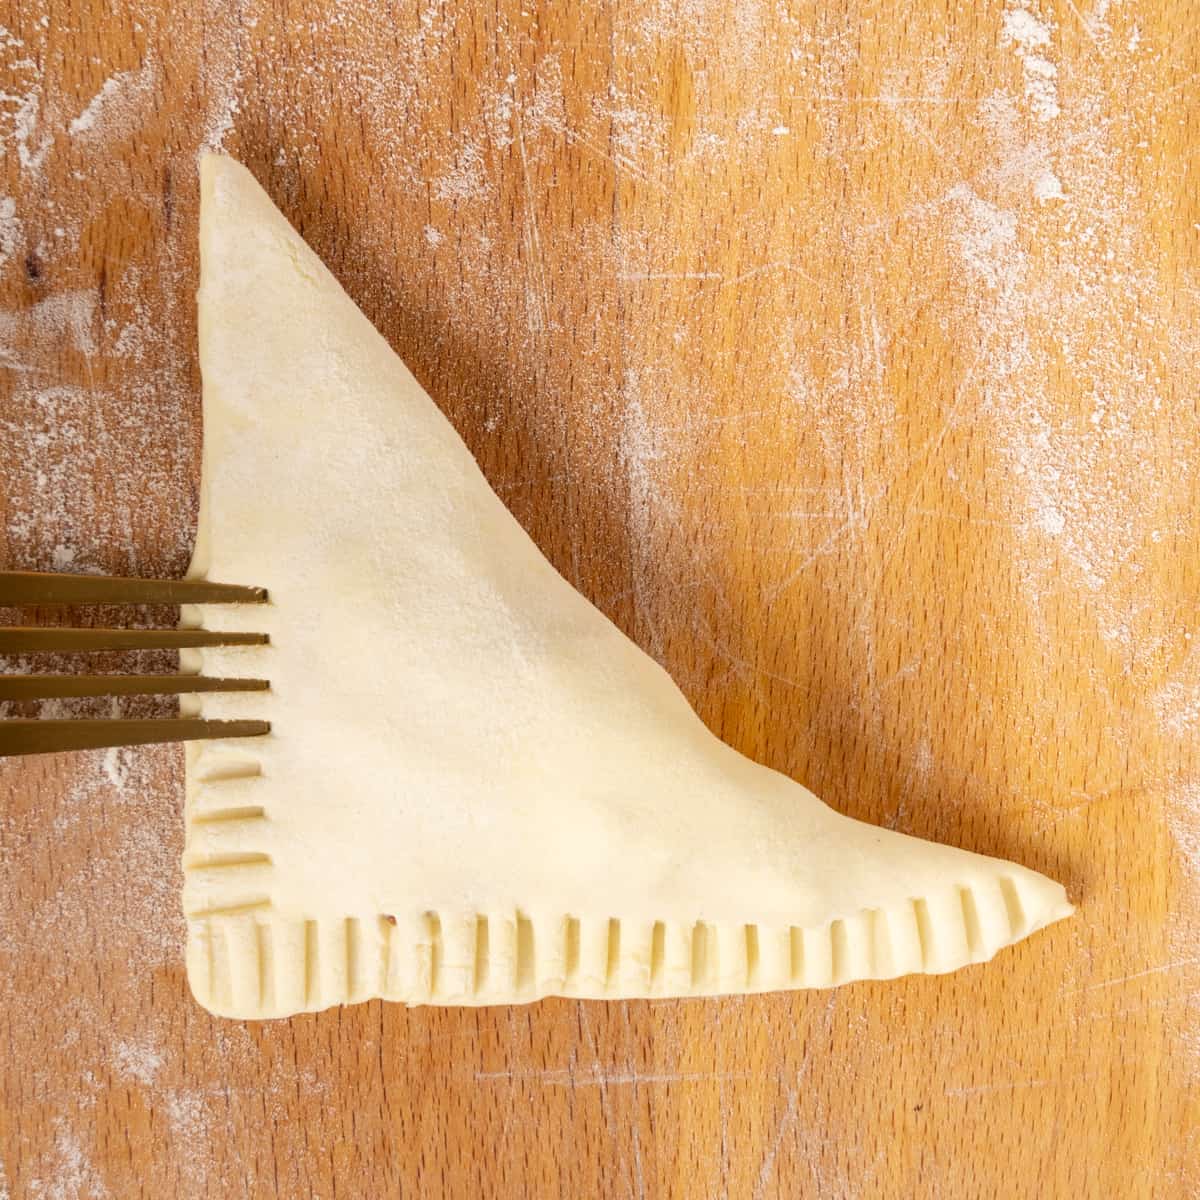 Crimping the edges of the turnovers with a fork to seal them tightly.